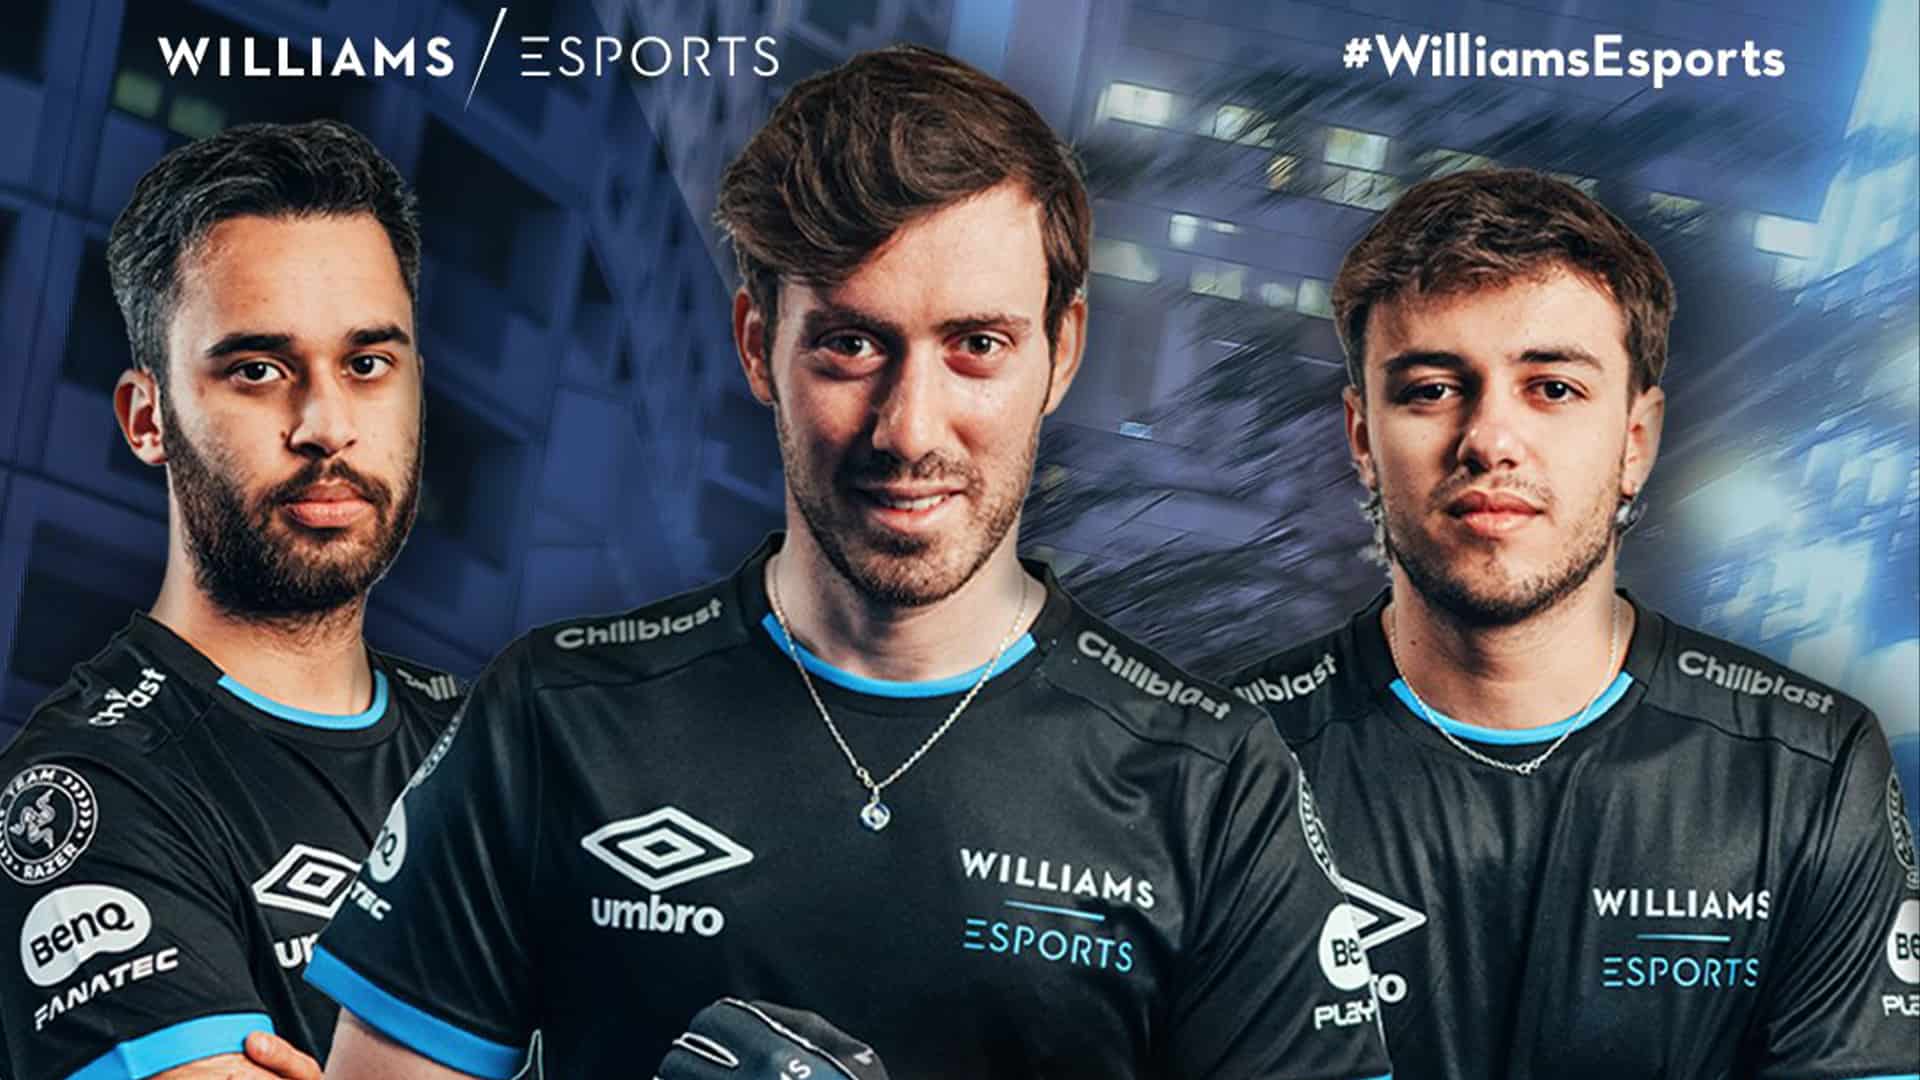 Williams Esports announce its 2022 F1 Esports Series Pro line-up